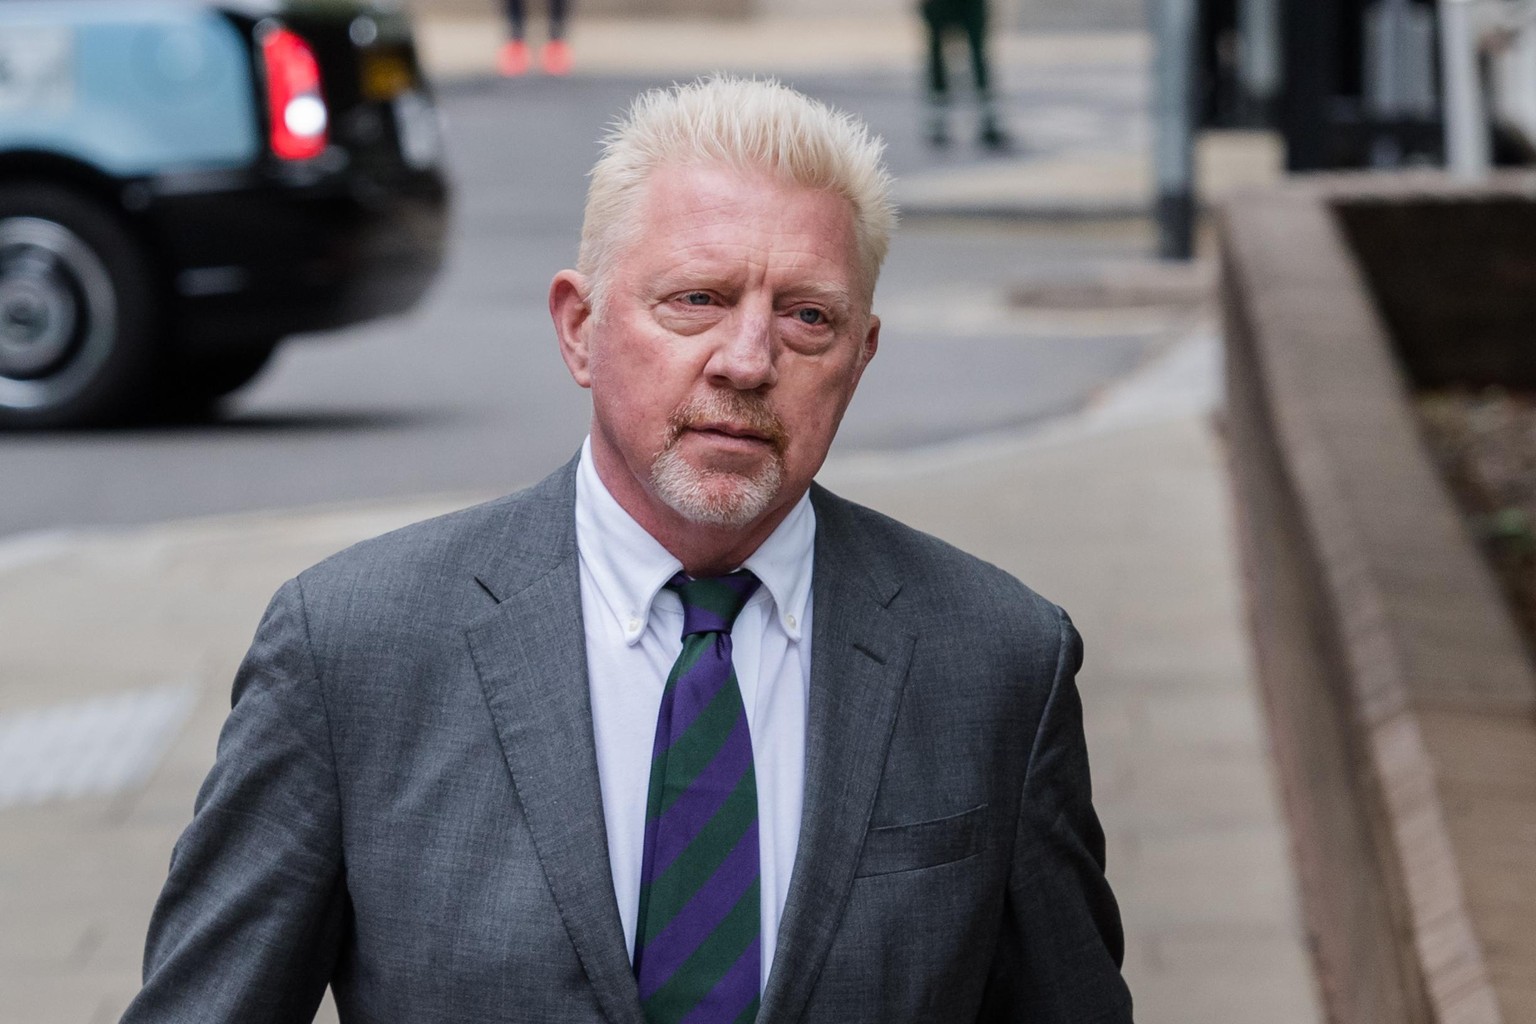 LONDON, UNITED KINGDOM - APRIL 29: Former tennis star Boris Becker arrives at the Southwark Crown Court for sentencing after being found guilty of four charges under the Insolvency Act in relation to  ...